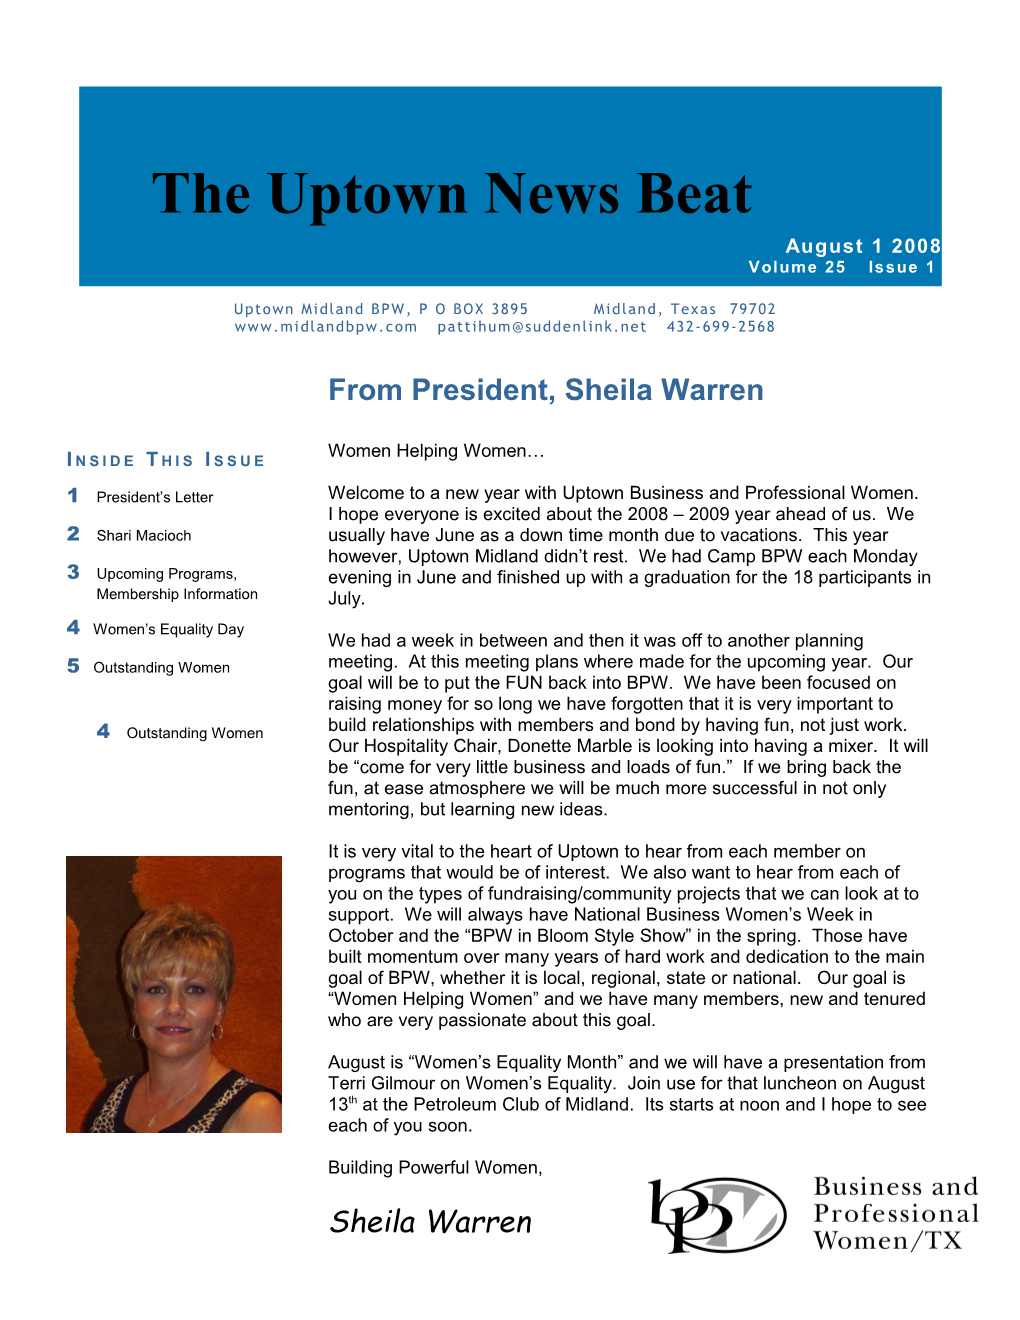 The Uptown News Beat